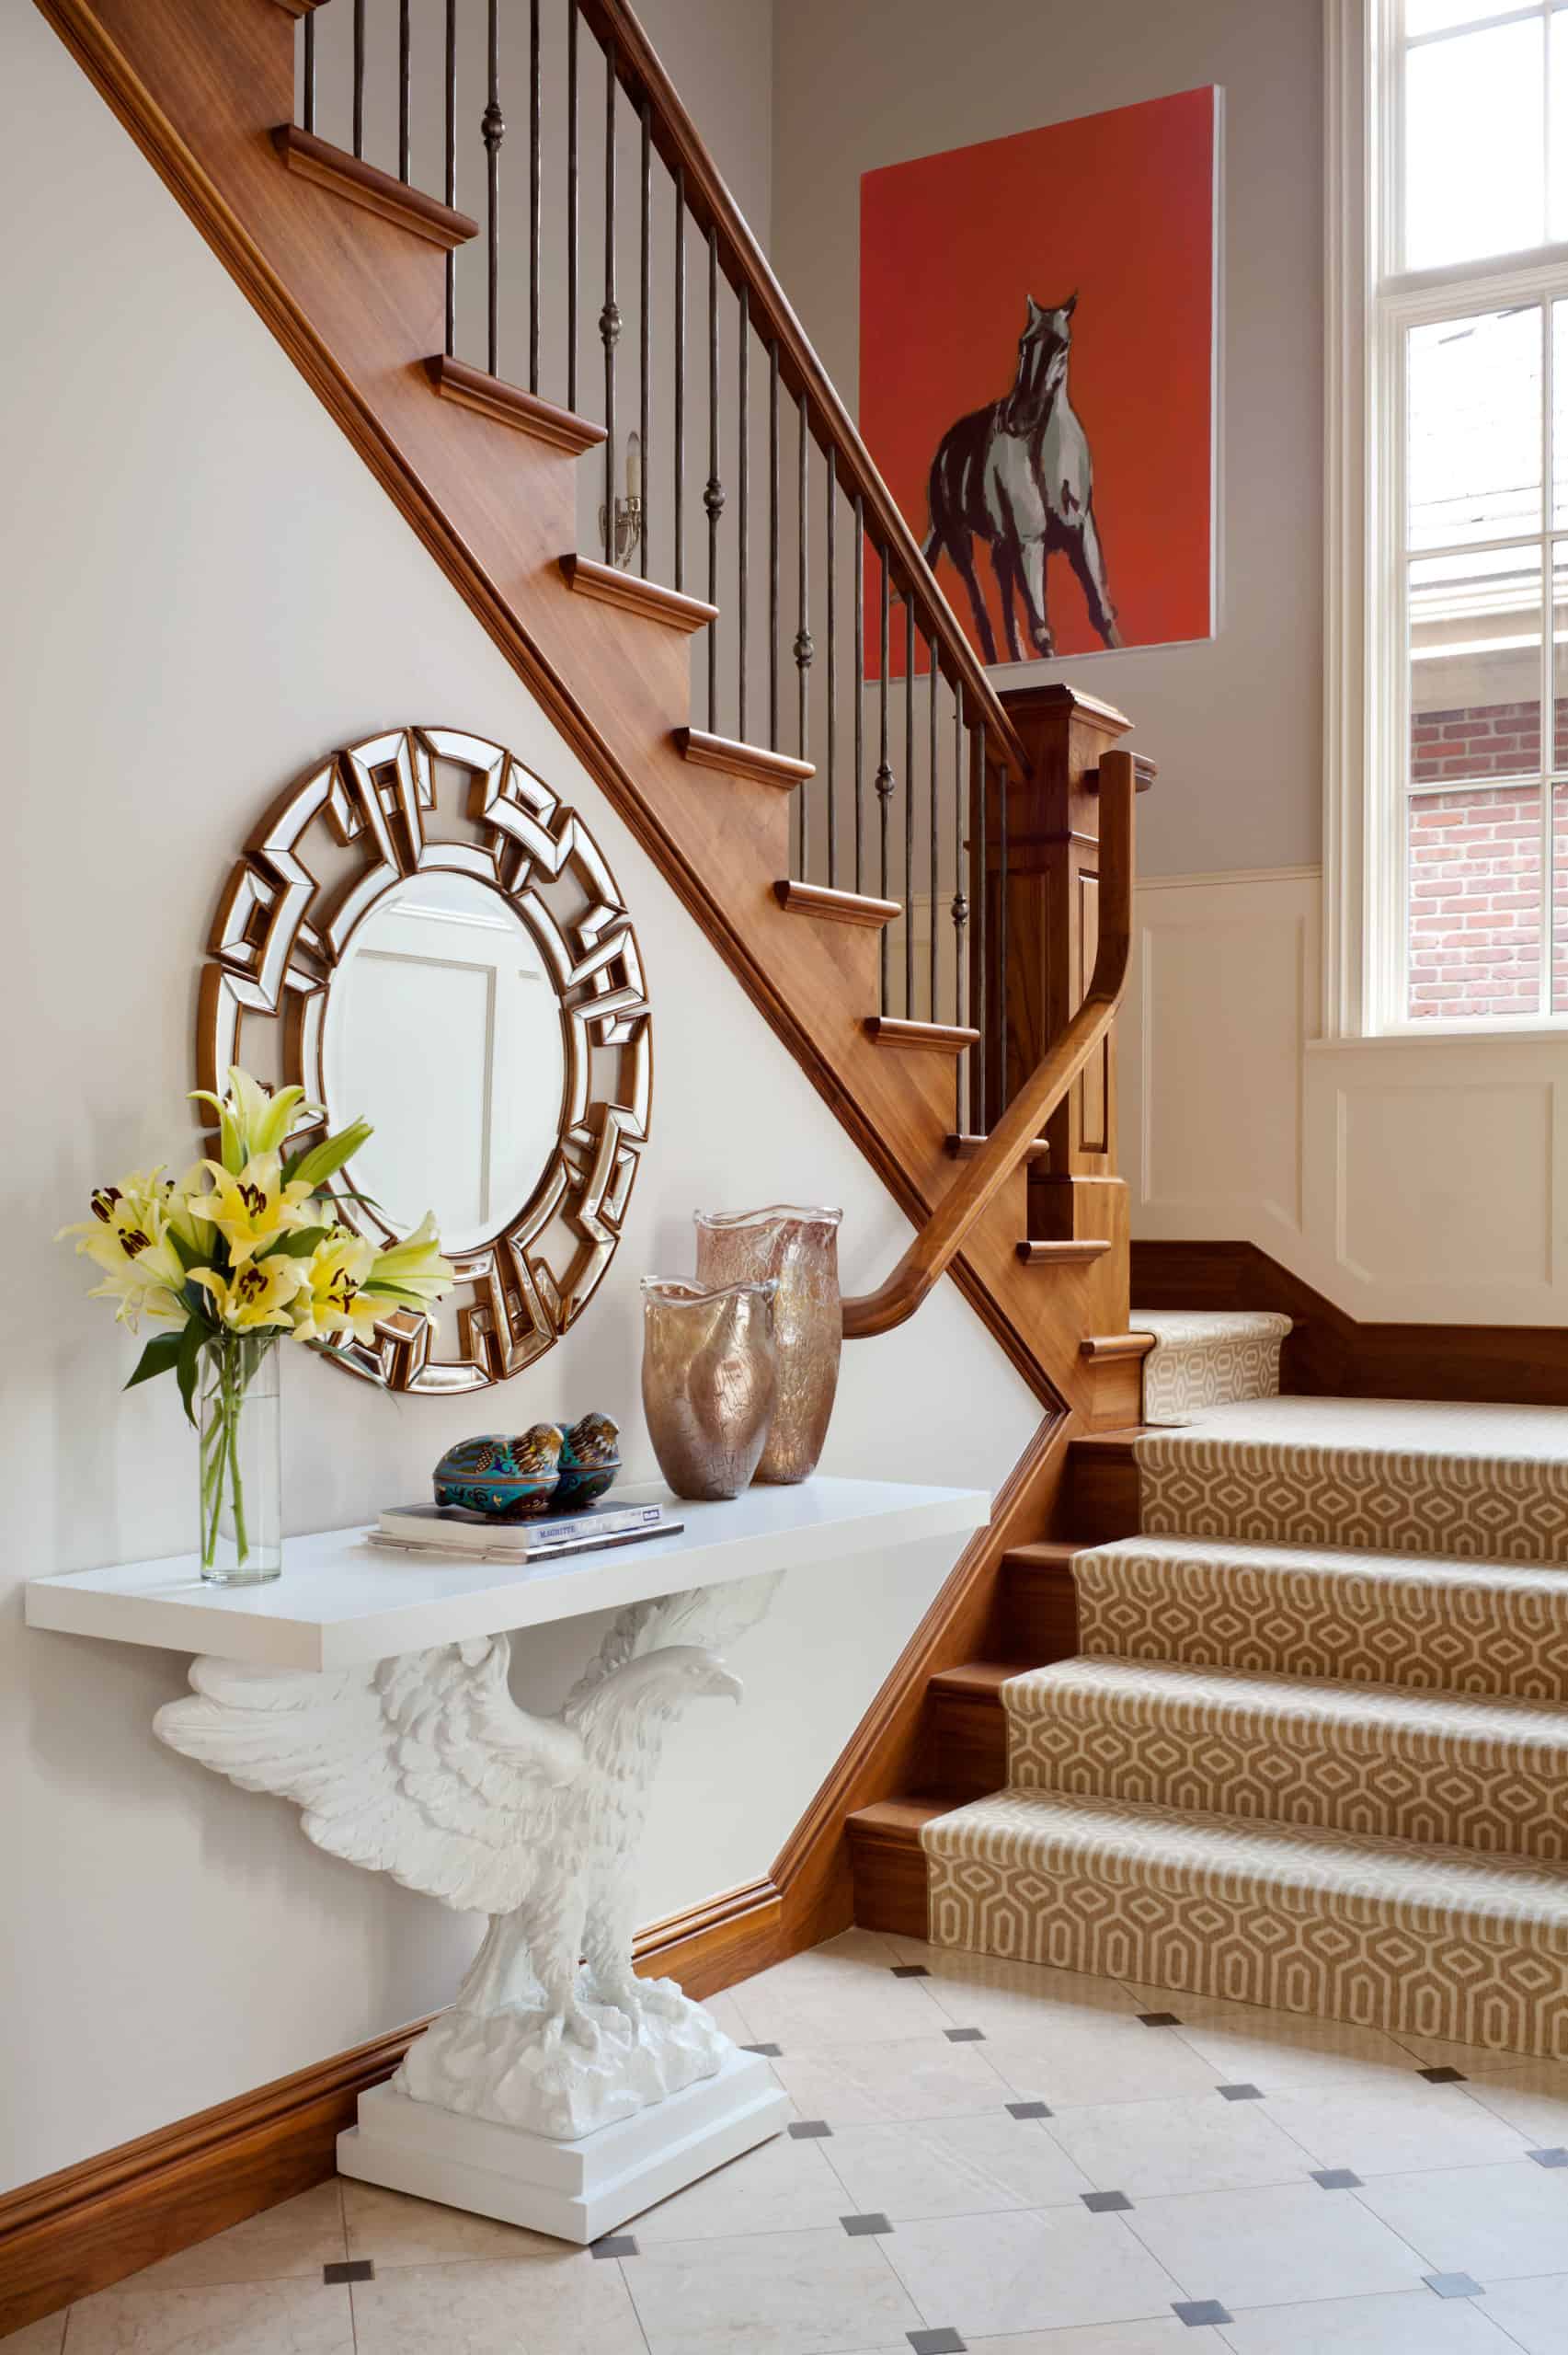 Simple foyer with eagle console table and wooden banister for Traditional with a twist style